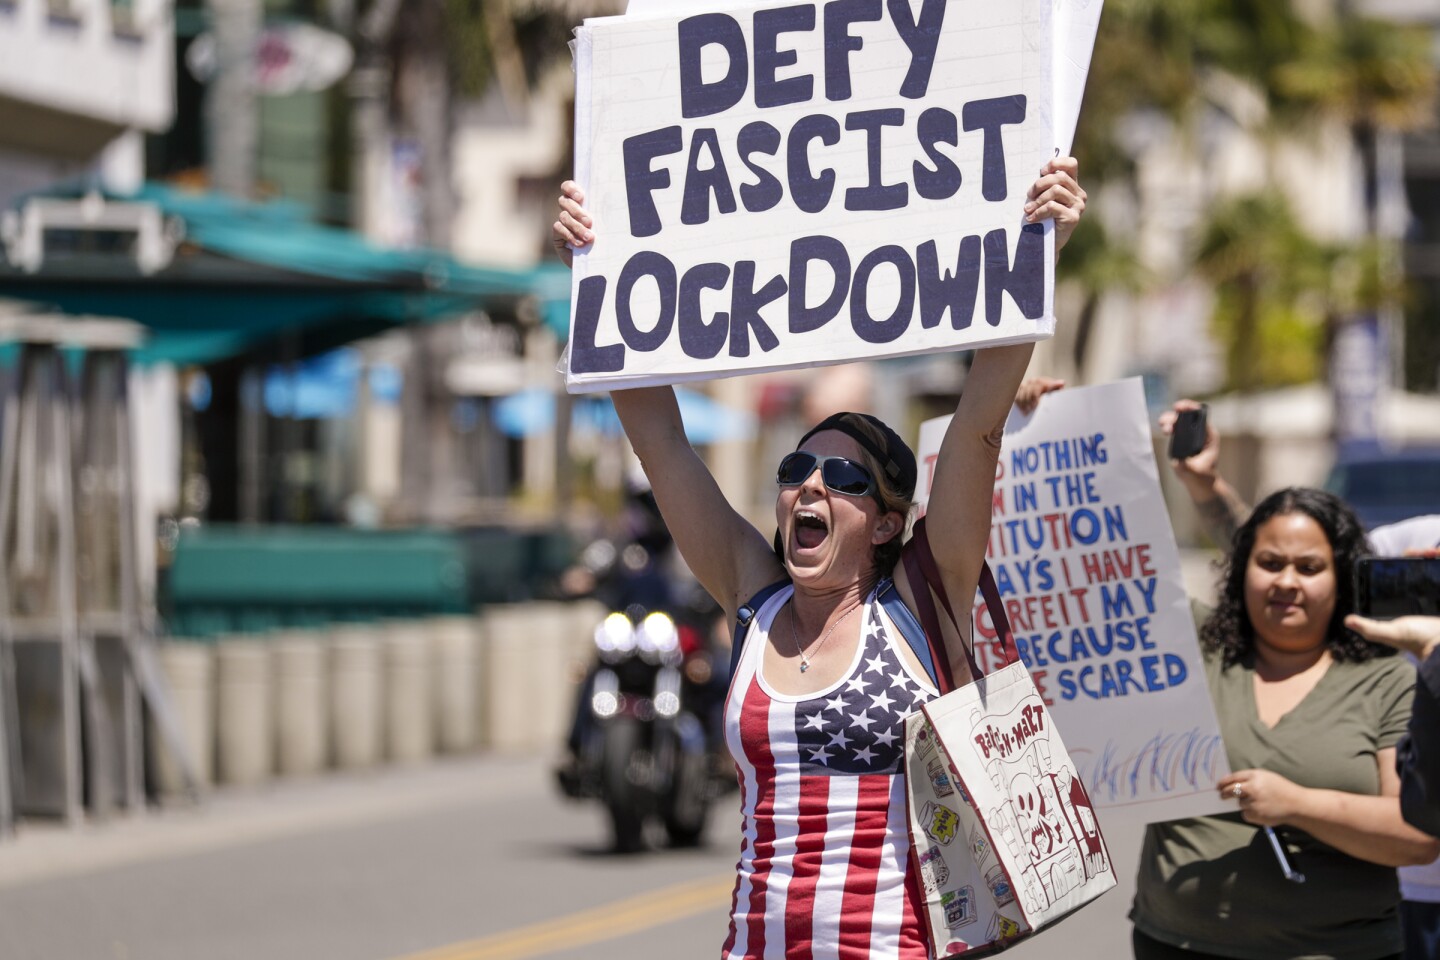 HUNTINGTON BEACH, CA - APRIL 17: Sarah Mason, from Covina, at a rally against the lockdown due to coronavirus pandemic. A big number of Trump supporters rally on Main Street against business closure due to COVID-19 pandemic. Huntington Beach, CA. (Irfan Khan / Los Angeles Times)